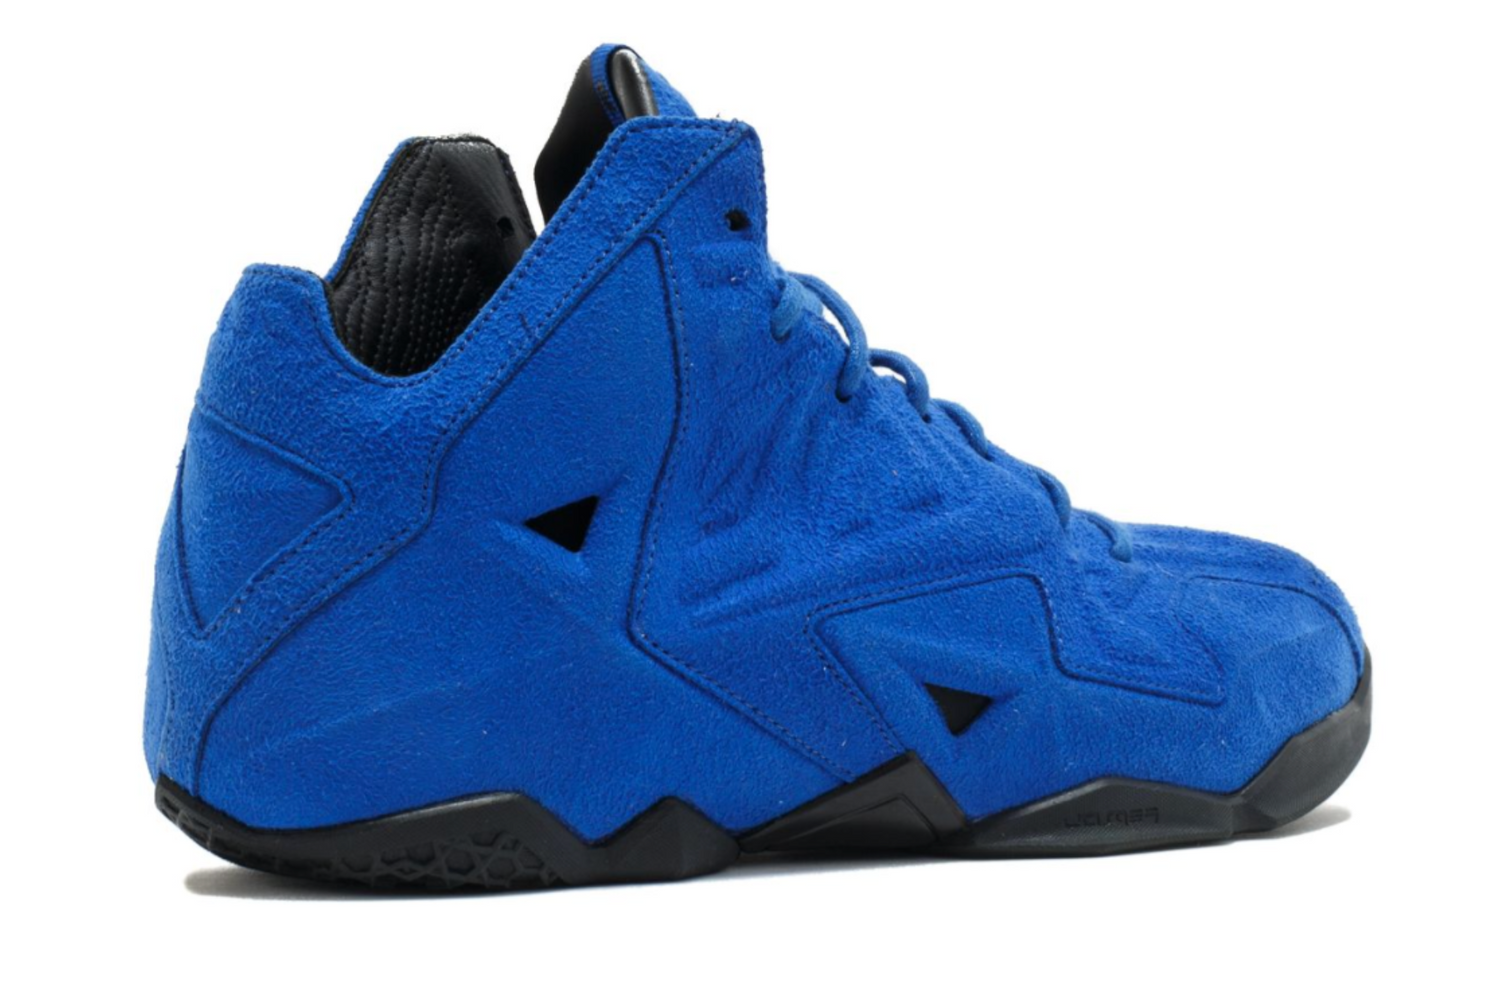 NIKE LEBRON 11 EXT BLUE SUEDE